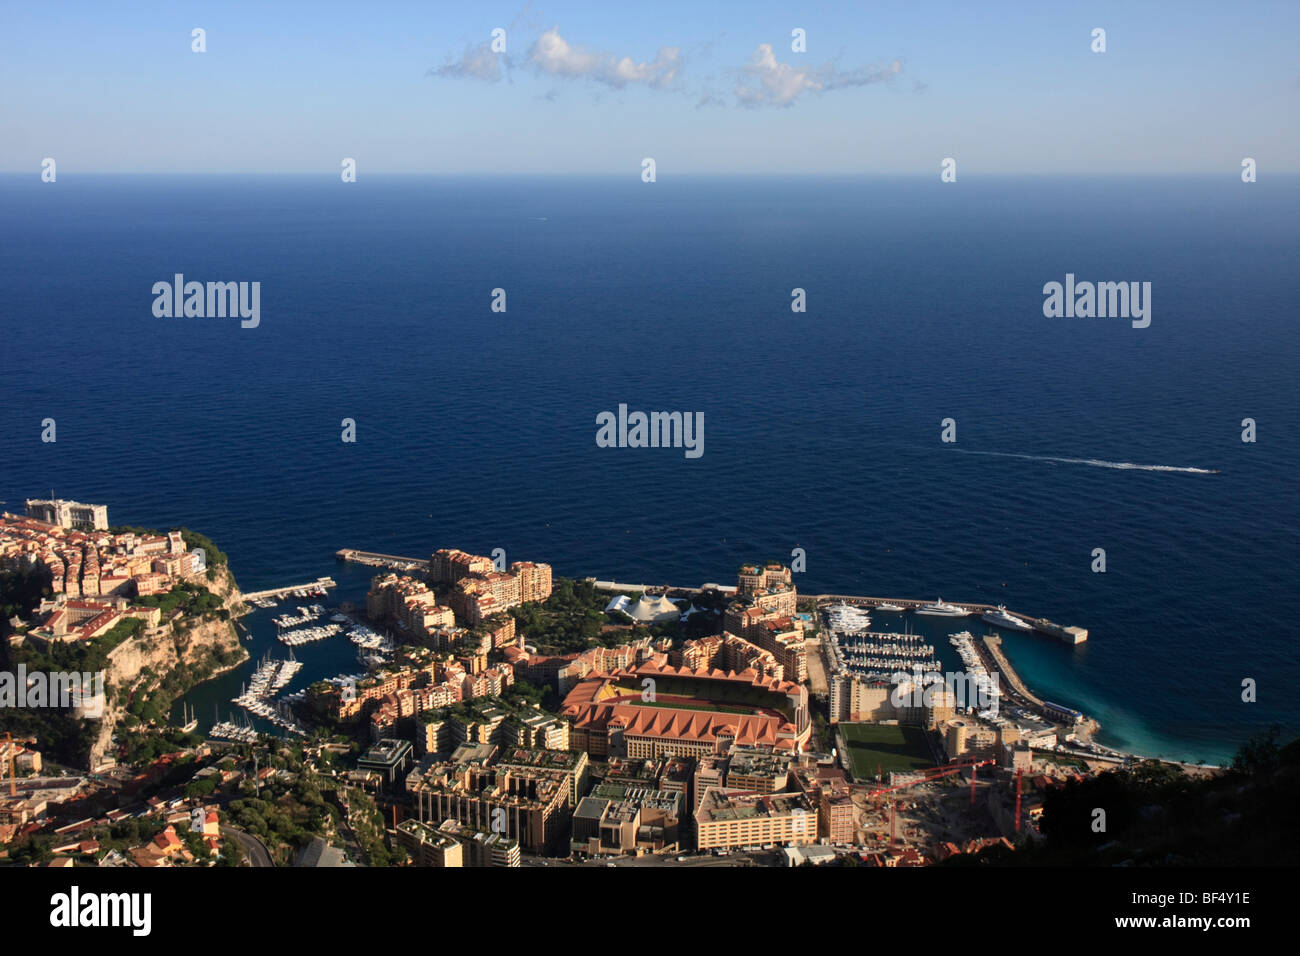 Fontvieille district with the ports of Fontvieille and Cap d'Ail, the football stadium of AS Monaco and the tent of the Circus  Stock Photo